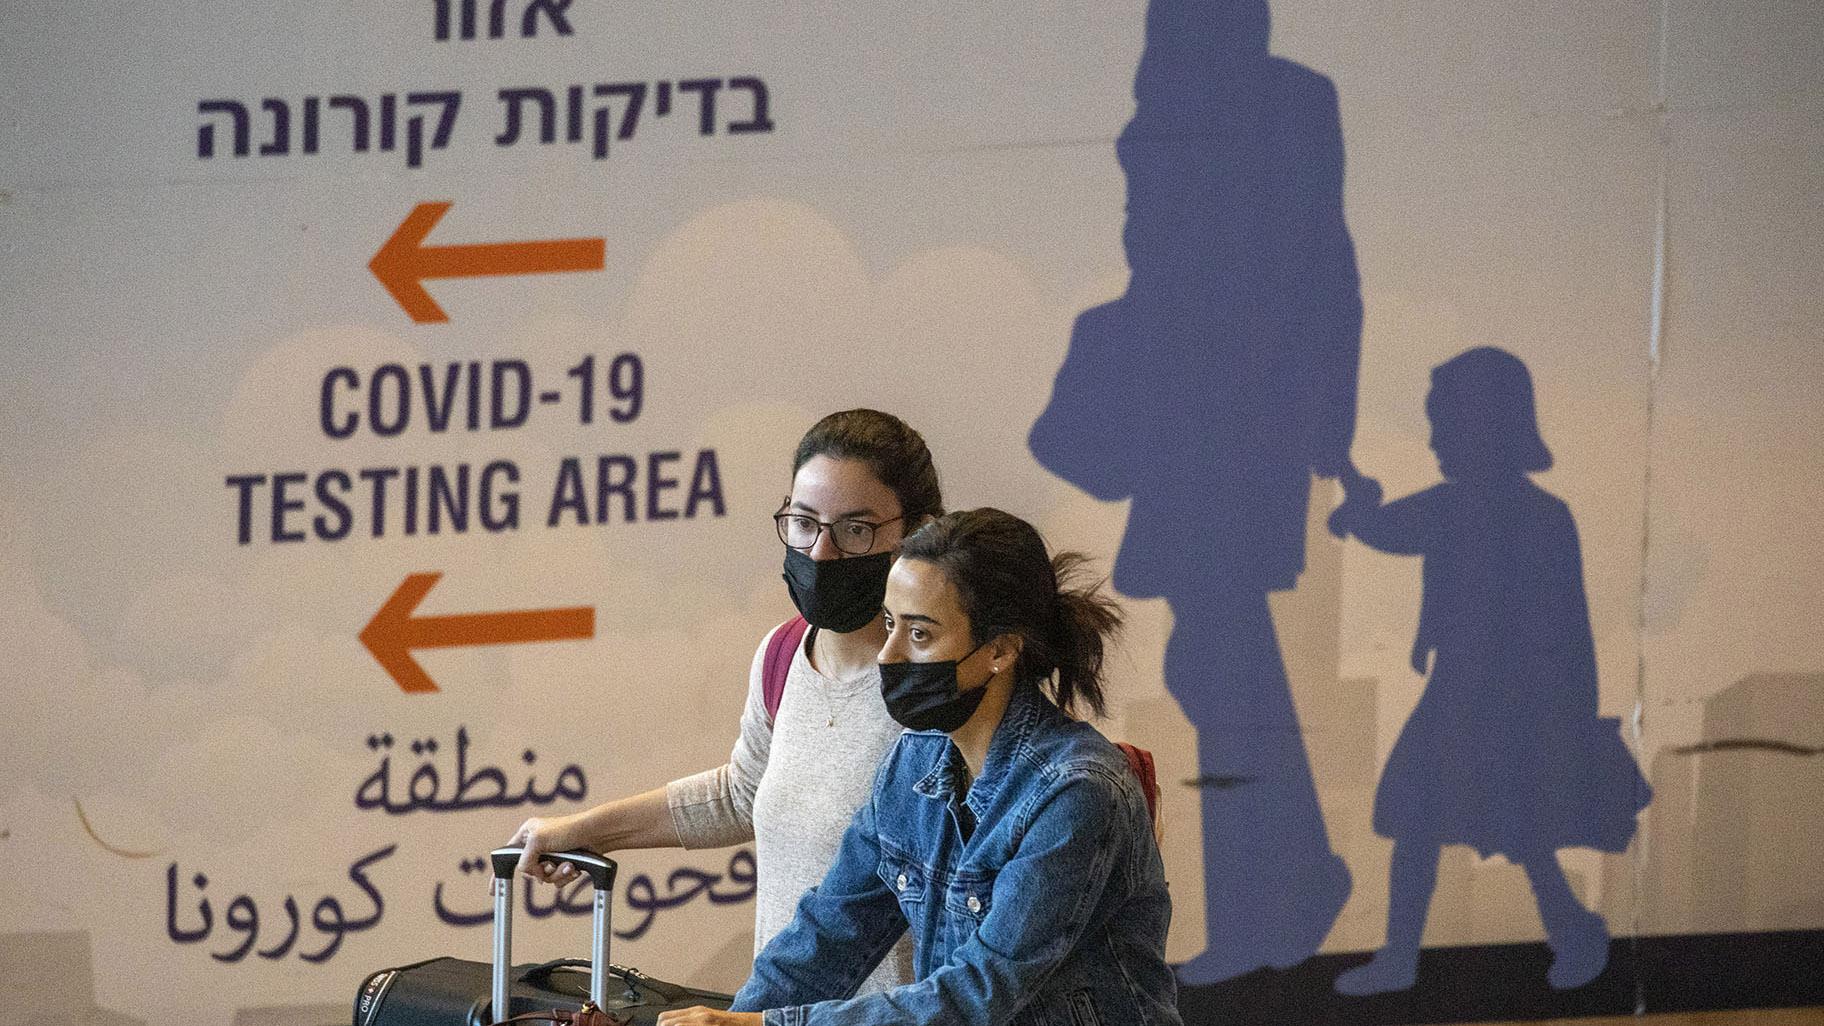 Travelers wearing protective face masks arrive at Ben Gurion Airport near Tel Aviv, Israel, Sunday, Nov. 28, 2021. Israel on Sunday approved barring entry to foreign nationals and the use of controversial technology for contact tracing as part of its efforts to clamp down on a new coronavirus variant. (AP Photo / Ariel Schalit)